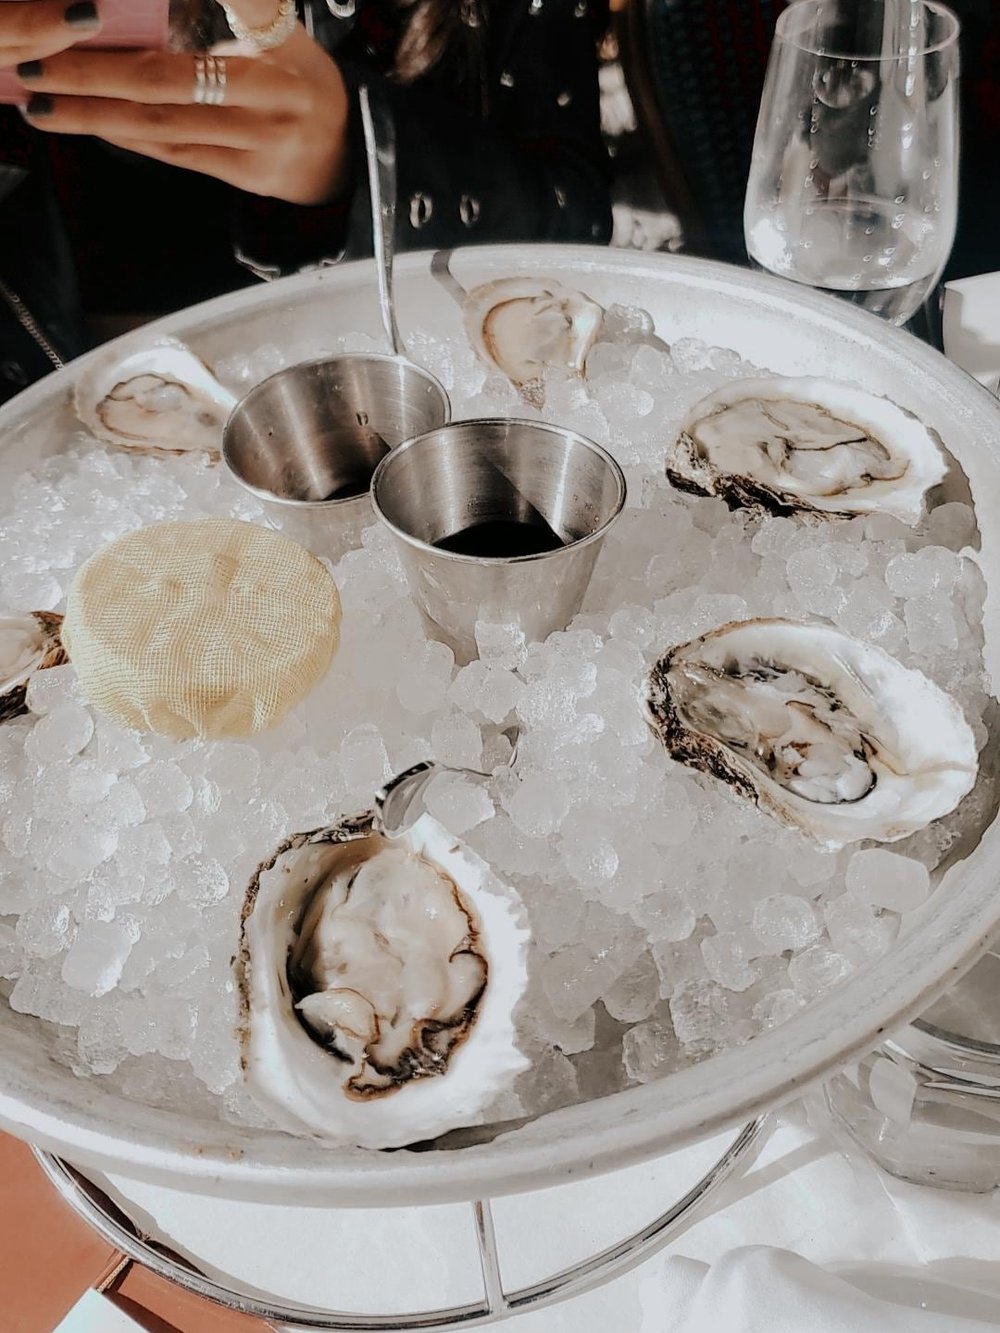 1\2 DOZEN OF BLUE POINT OYSTERS